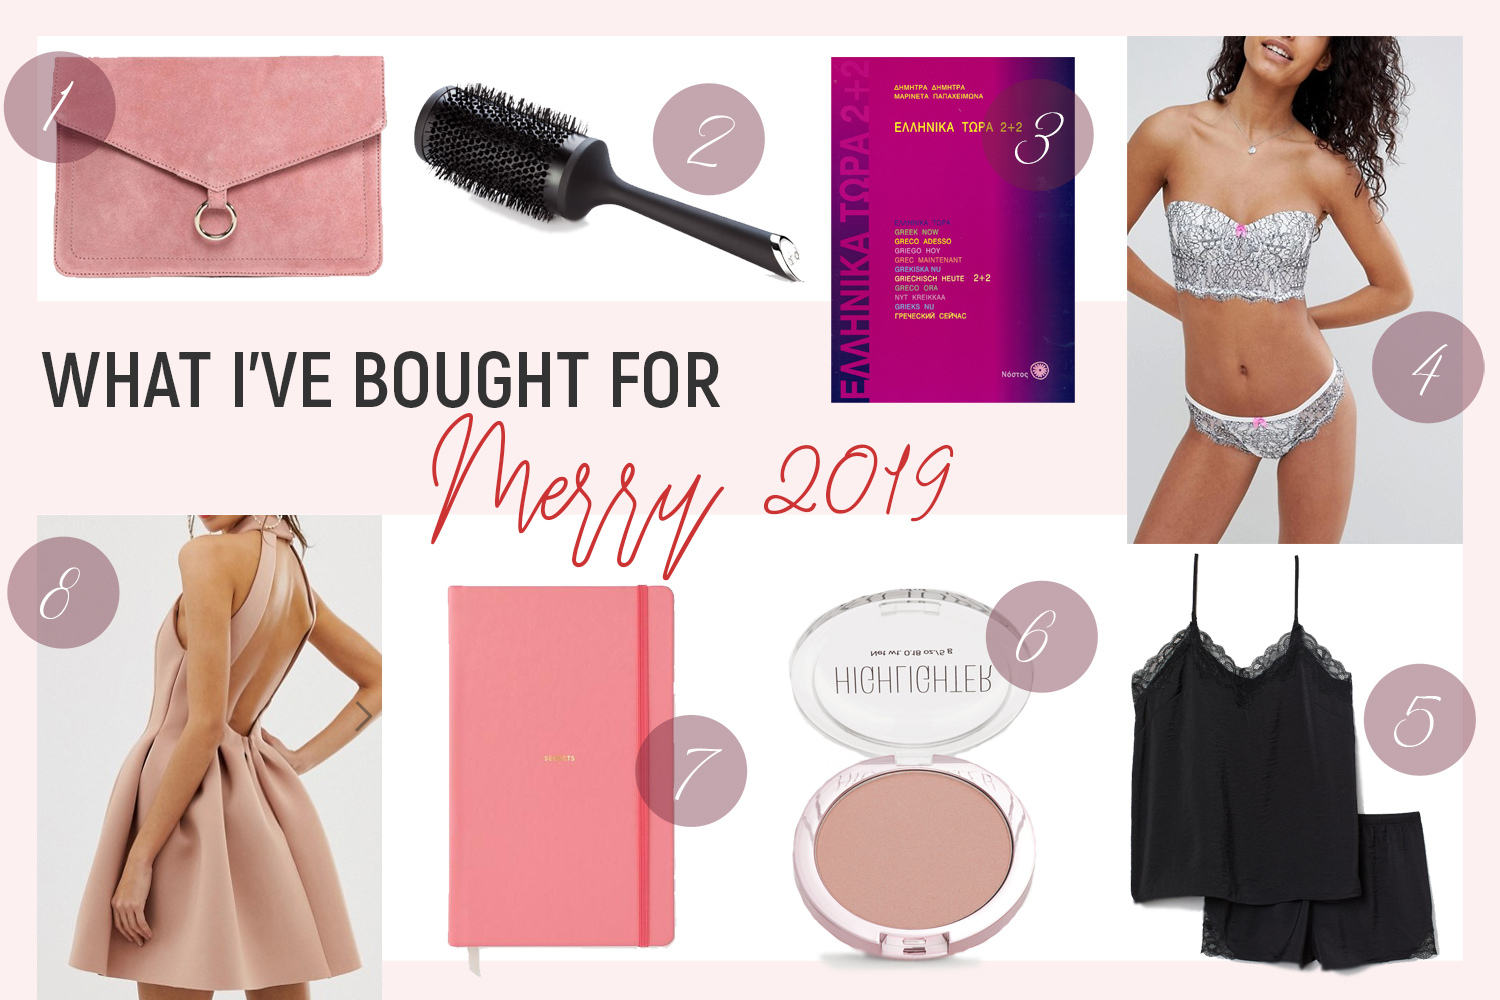 What I've Bought for Merry 2019 by Tamara Bellis